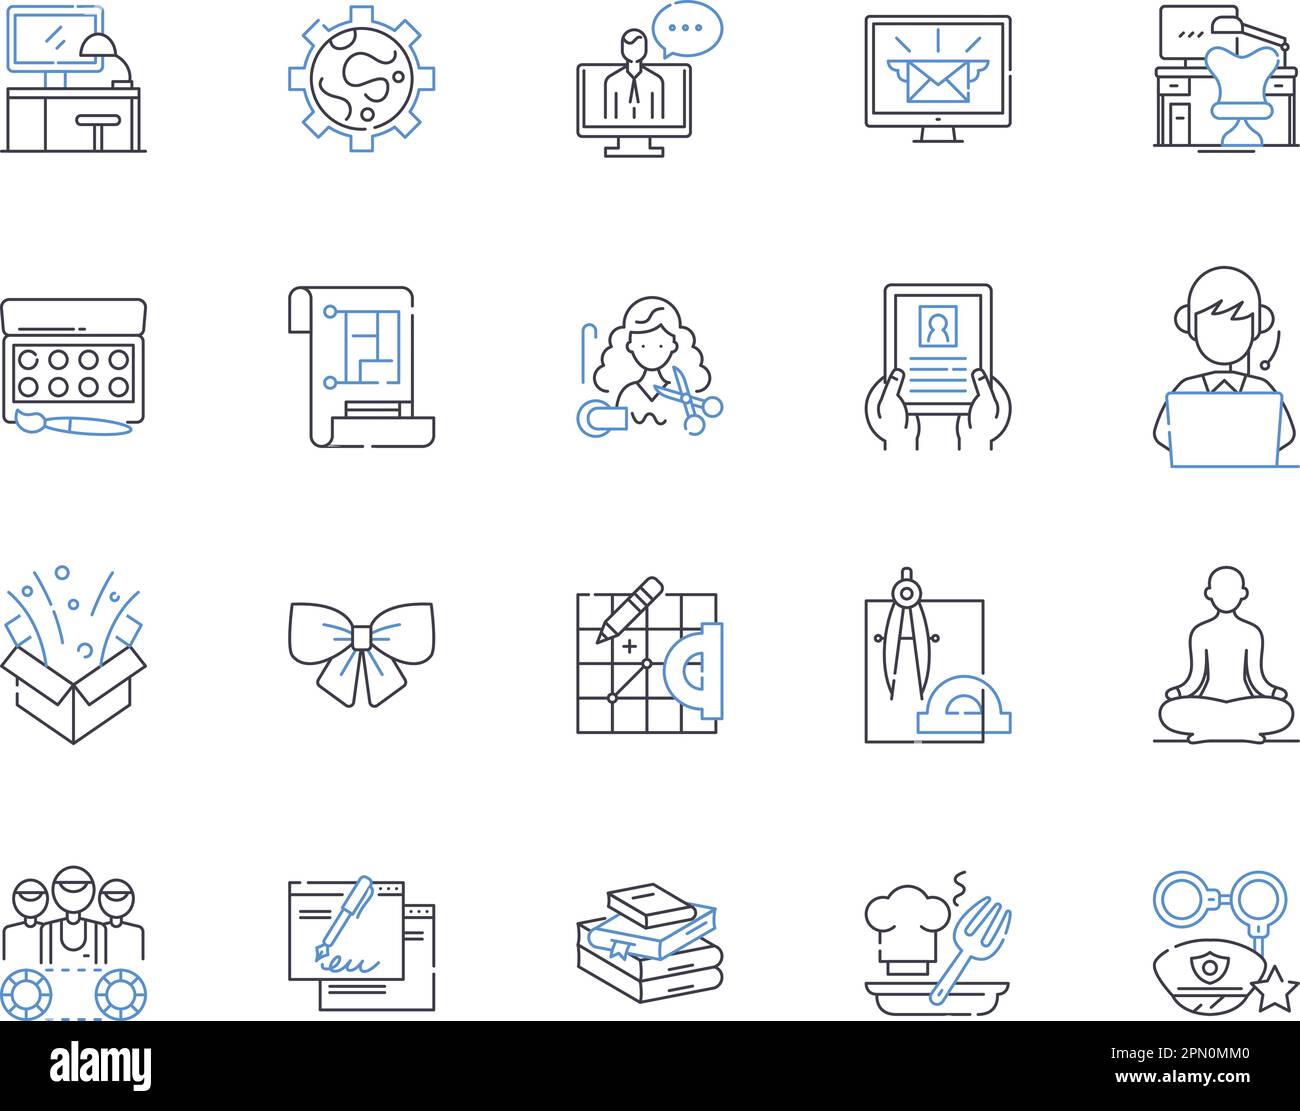 Freelance and work outline icons collection. Freelance, work, freelancer, job, remote, independent, self-employed vector and illustration concept set Stock Vector